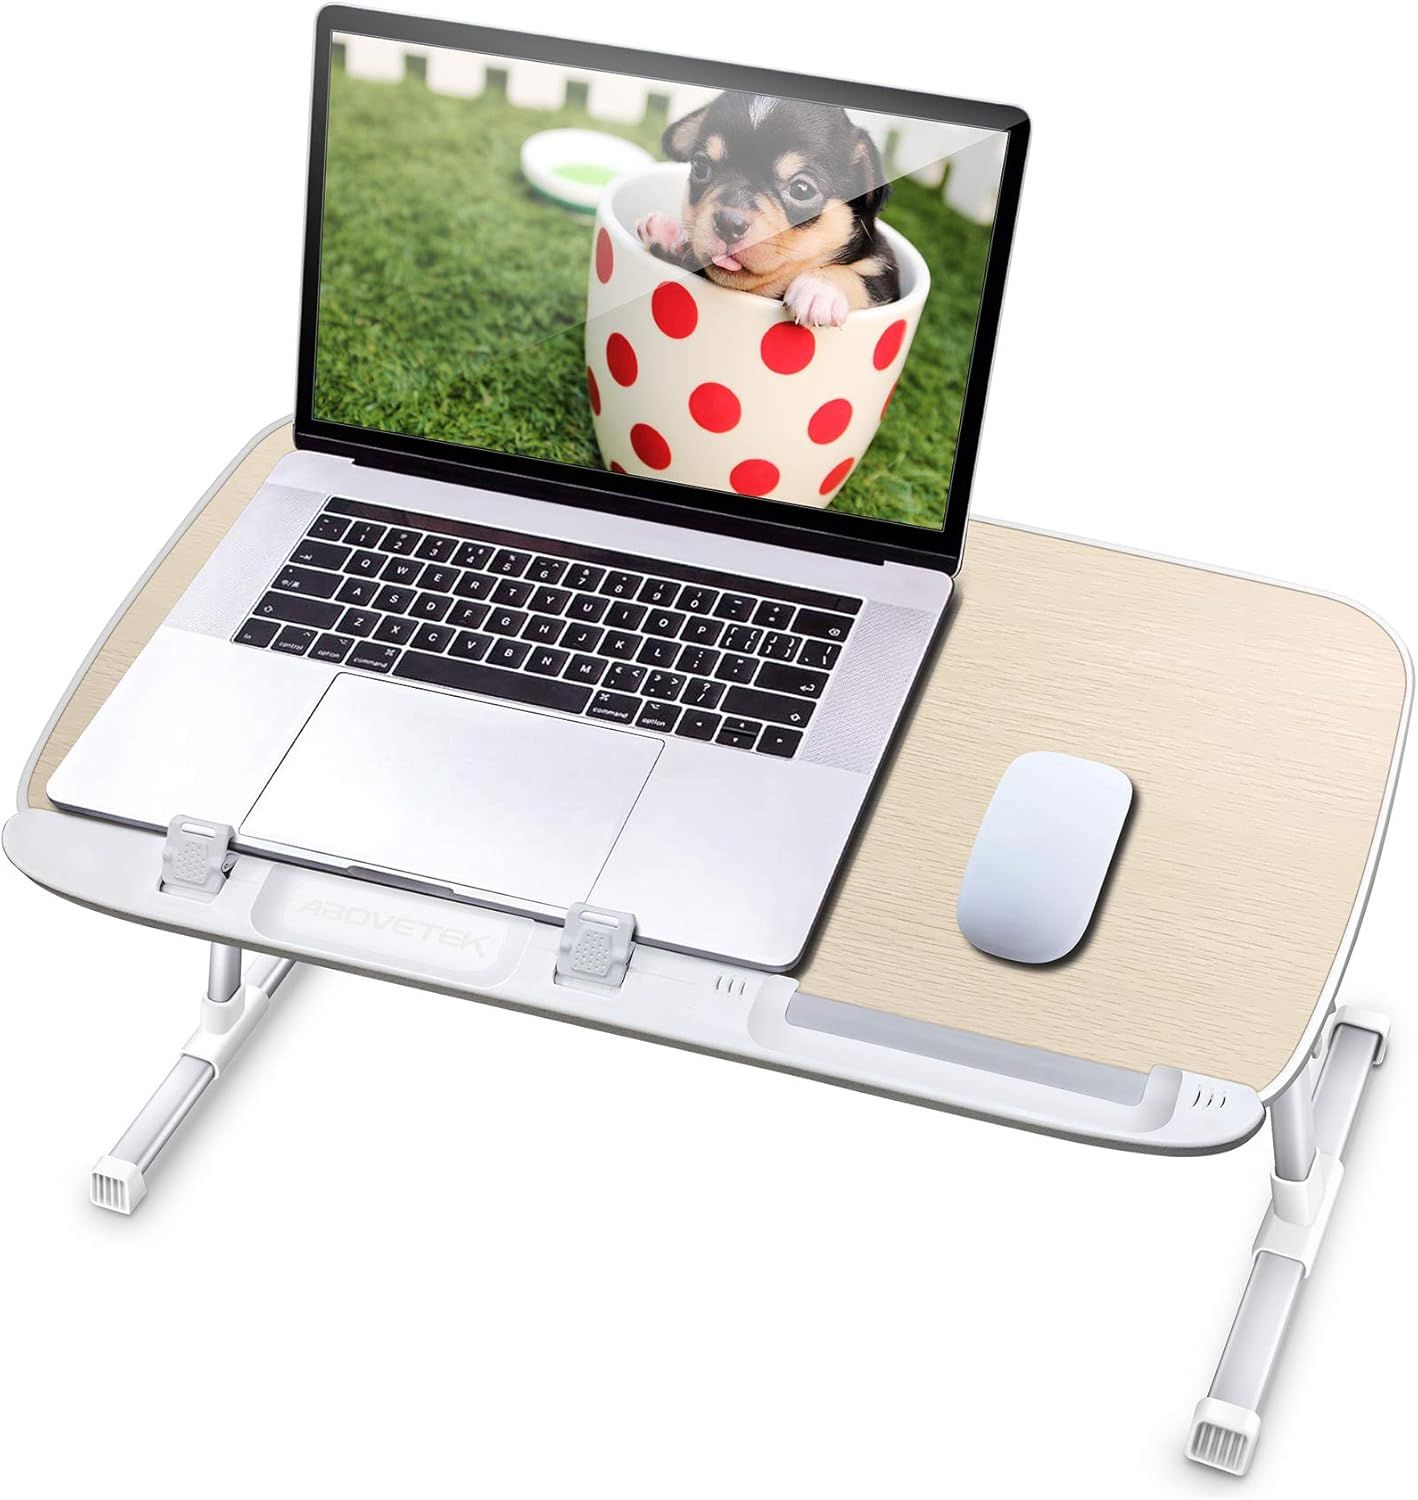 AboveTEK Laptop Desk for Bed, Portable Table Tray with Foldable Legs, Height Adjustable Notebook ... | Amazon (US)